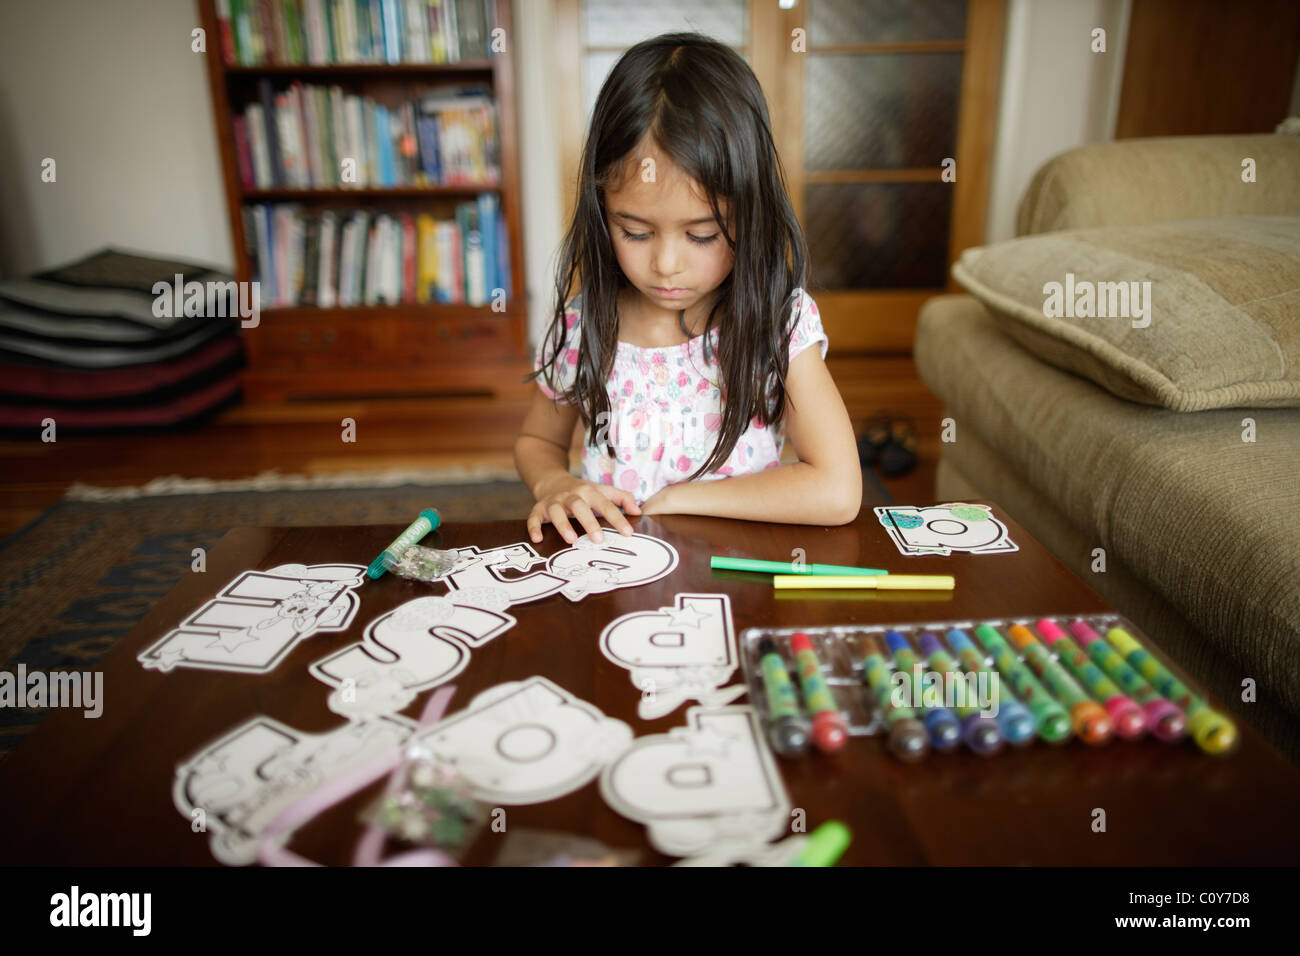 Six year old girl works on craft set of large letters to colour in and decorate Stock Photo